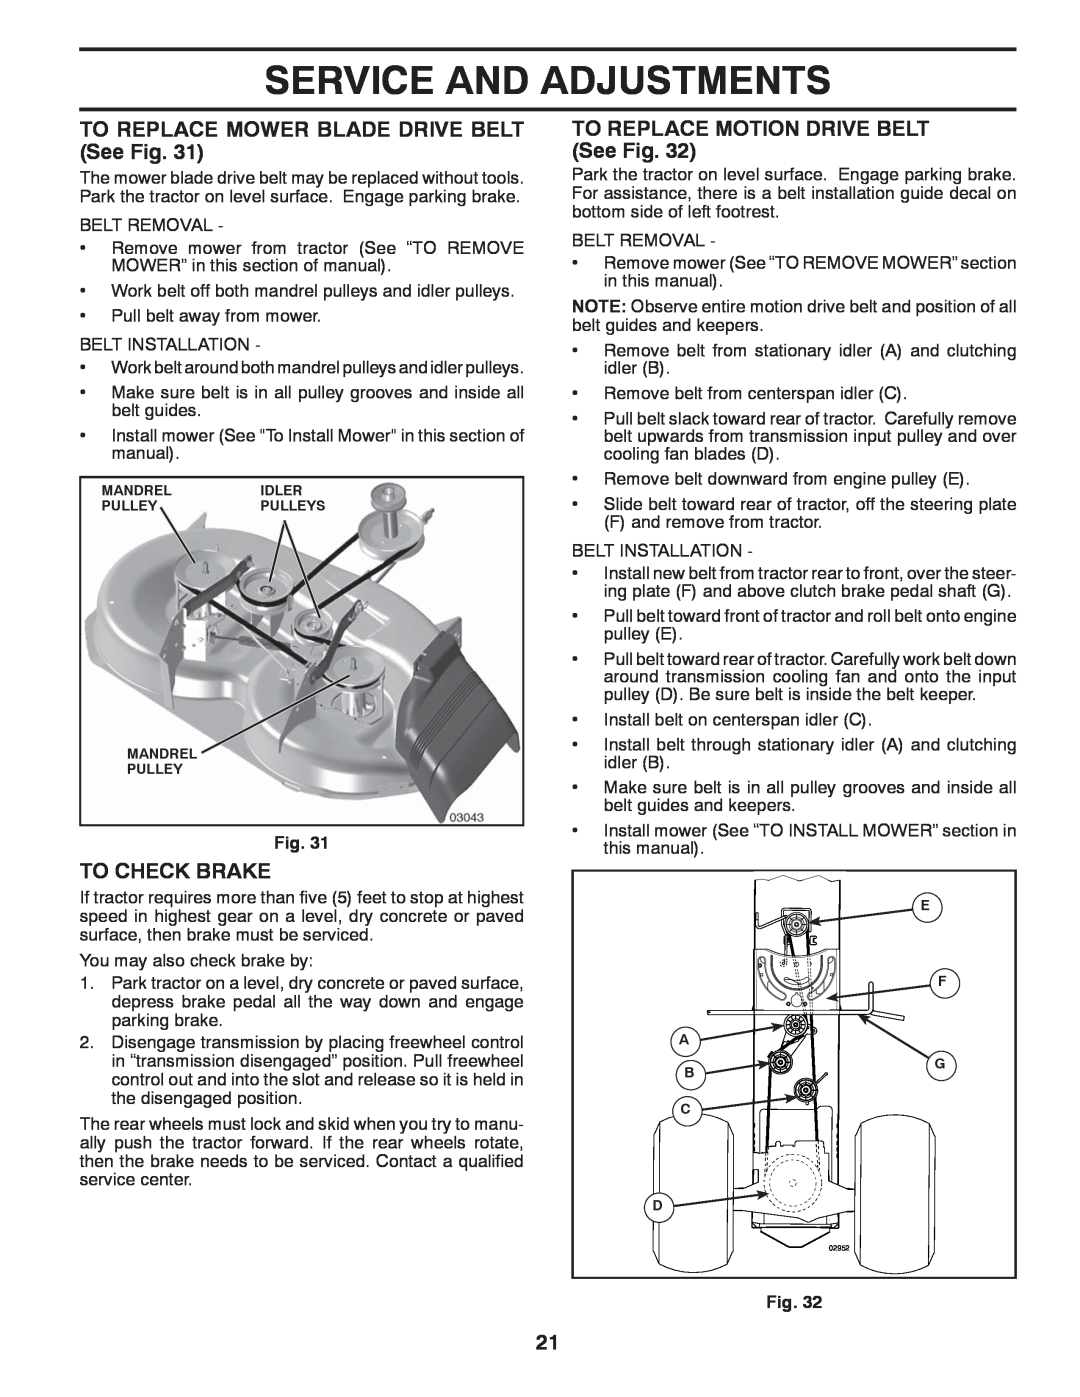 Poulan 96048000500 manual TO REPLACE MOWER BLADE DRIVE BELT See Fig, To Check Brake, TO REPLACE MOTION DRIVE BELT See Fig 